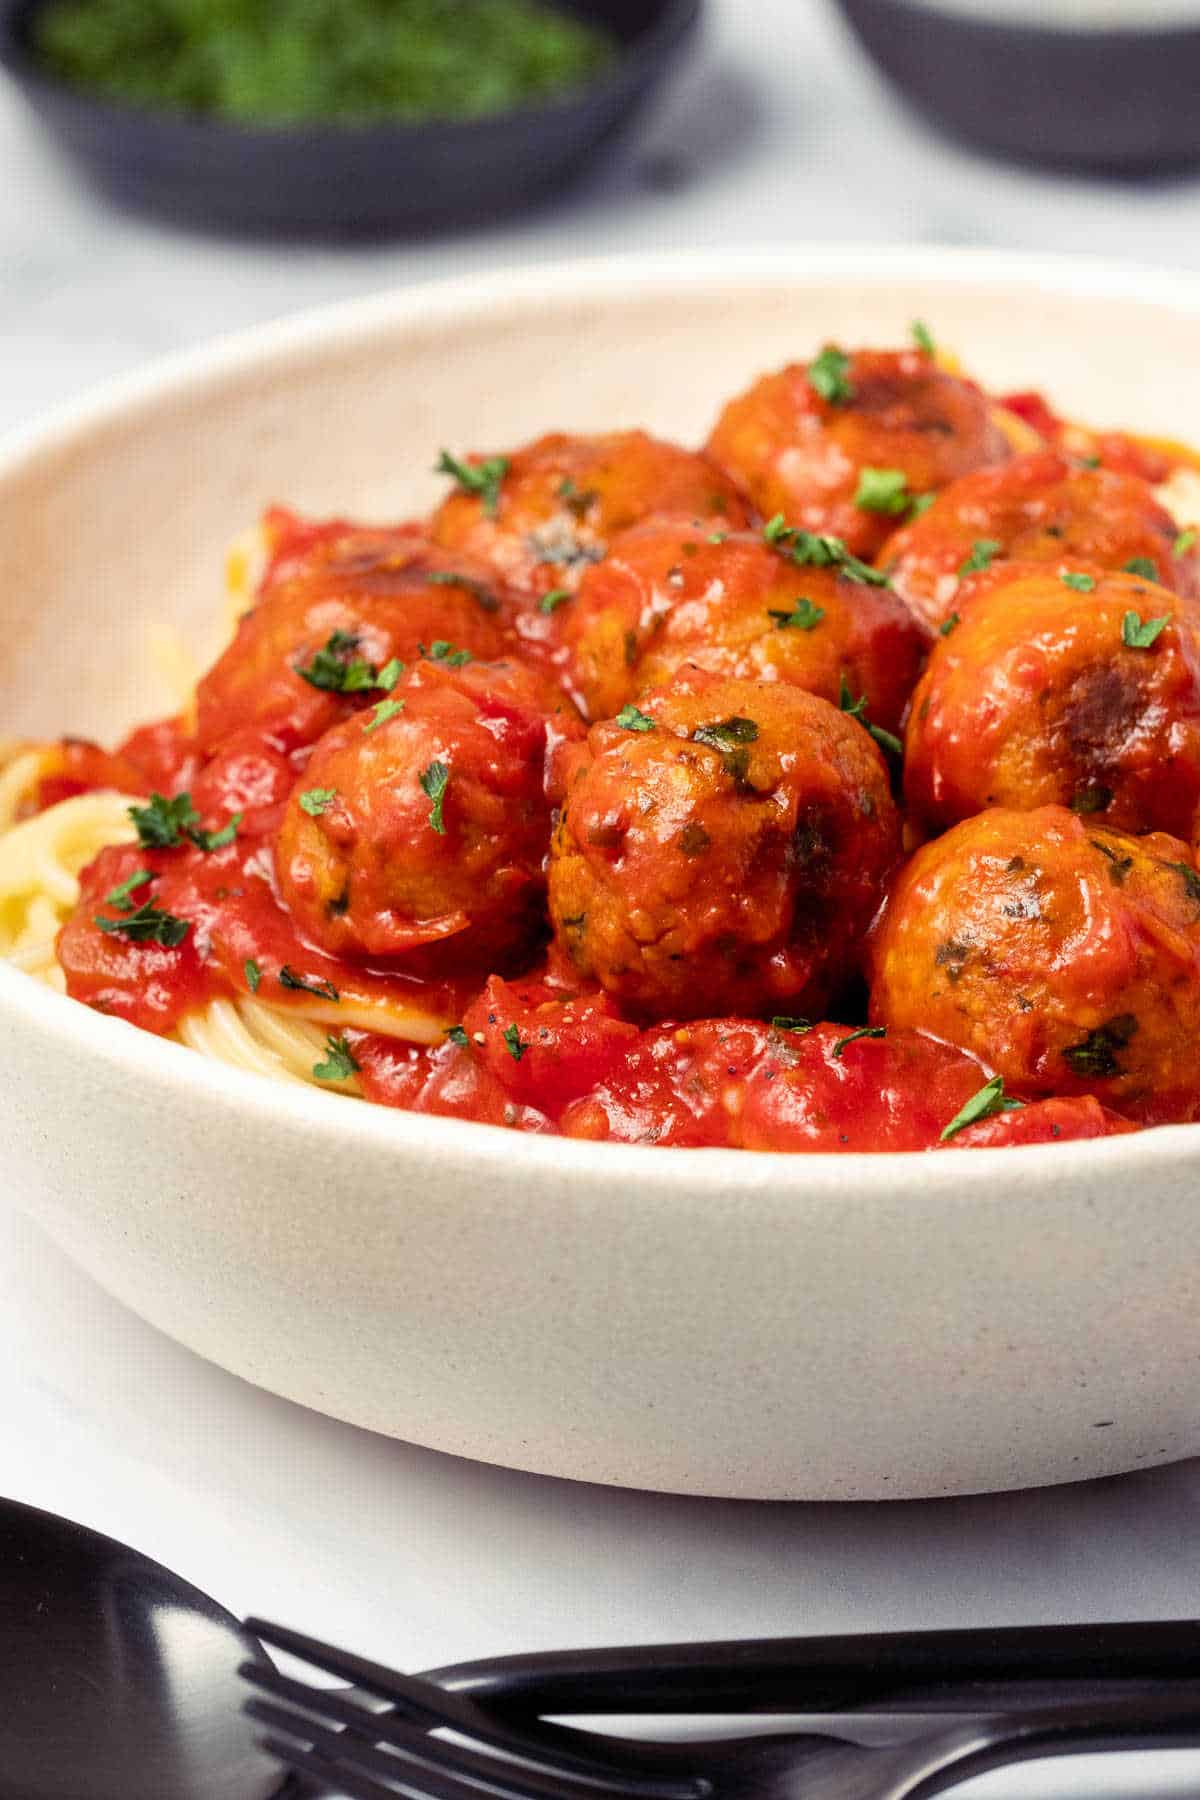 Chickpea meatballs with marinara sauce and spaghetti in a white bowl.